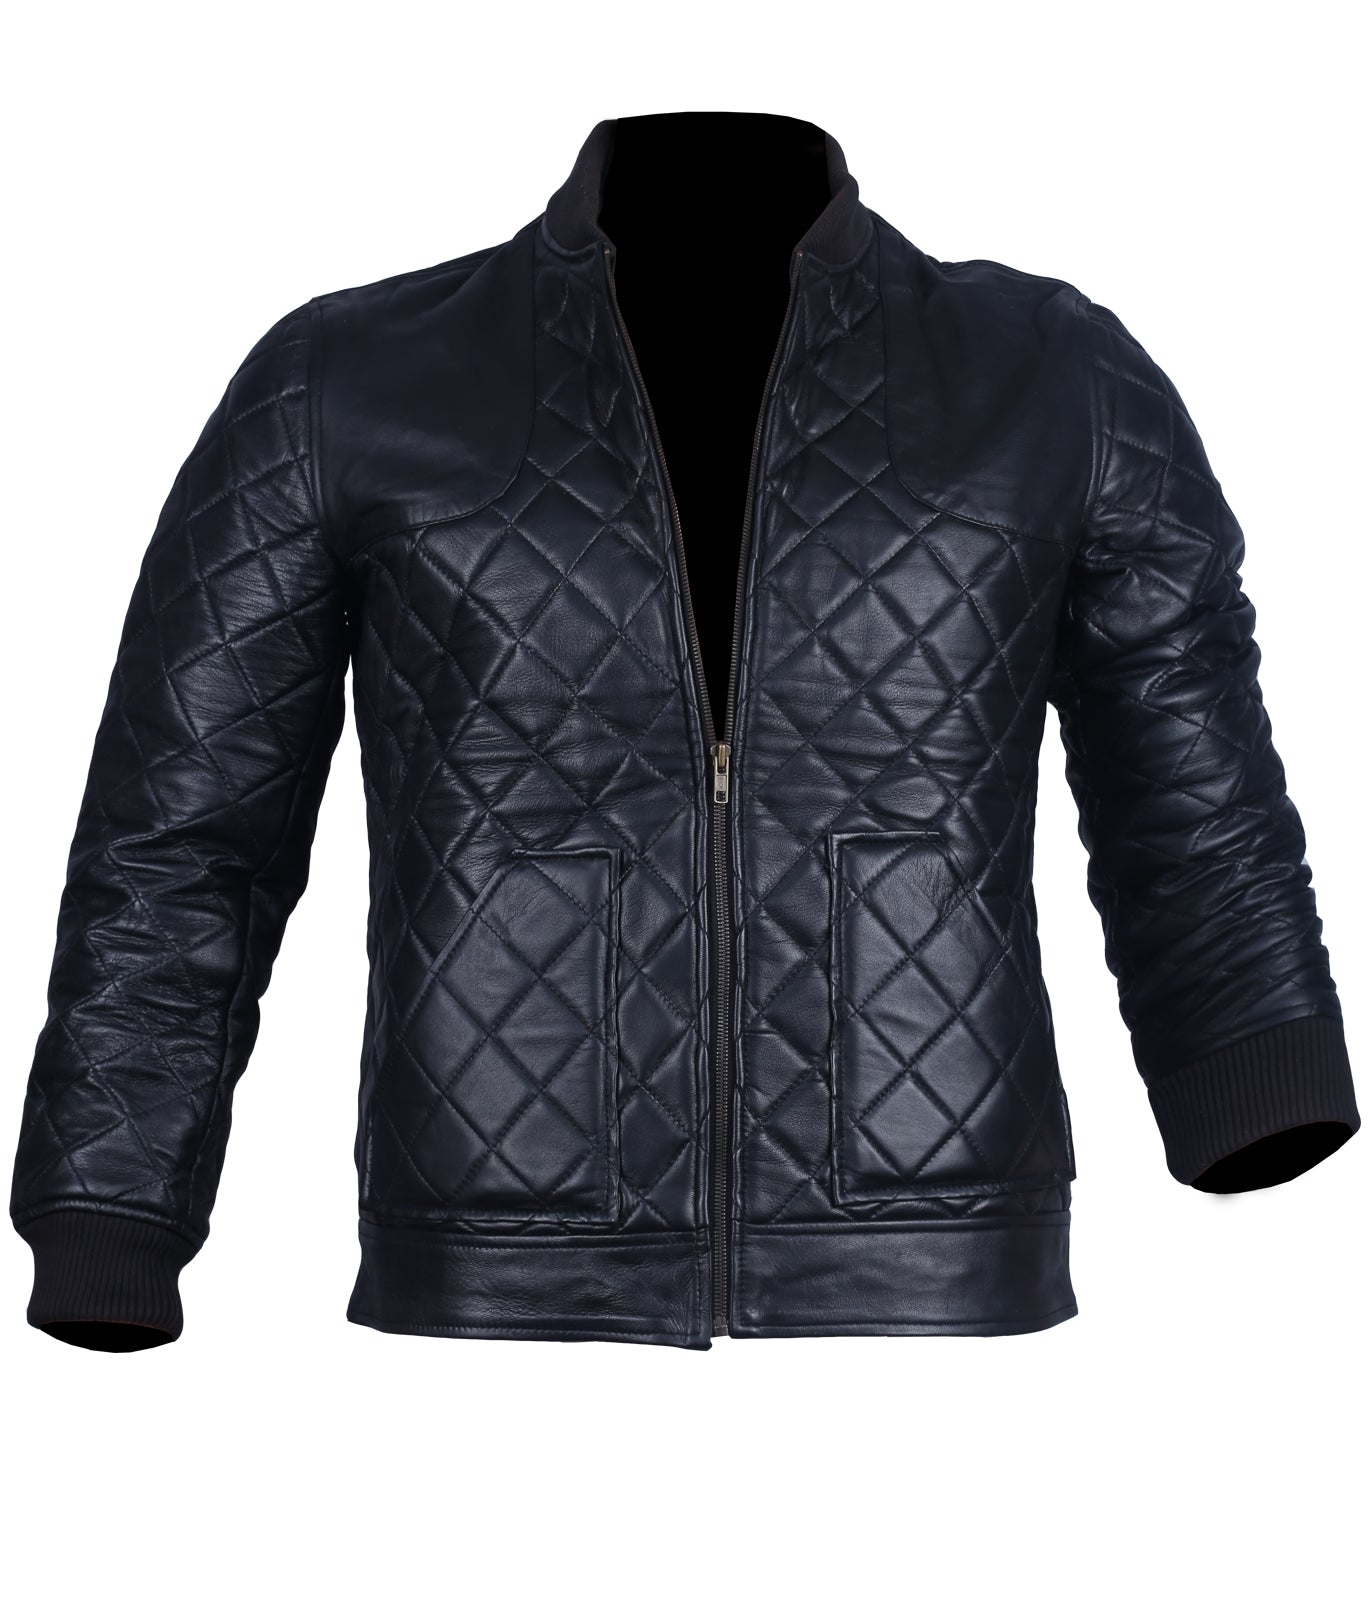 Men's Leather Bomber Jacket Diamond Quilted in Black – AlexGear